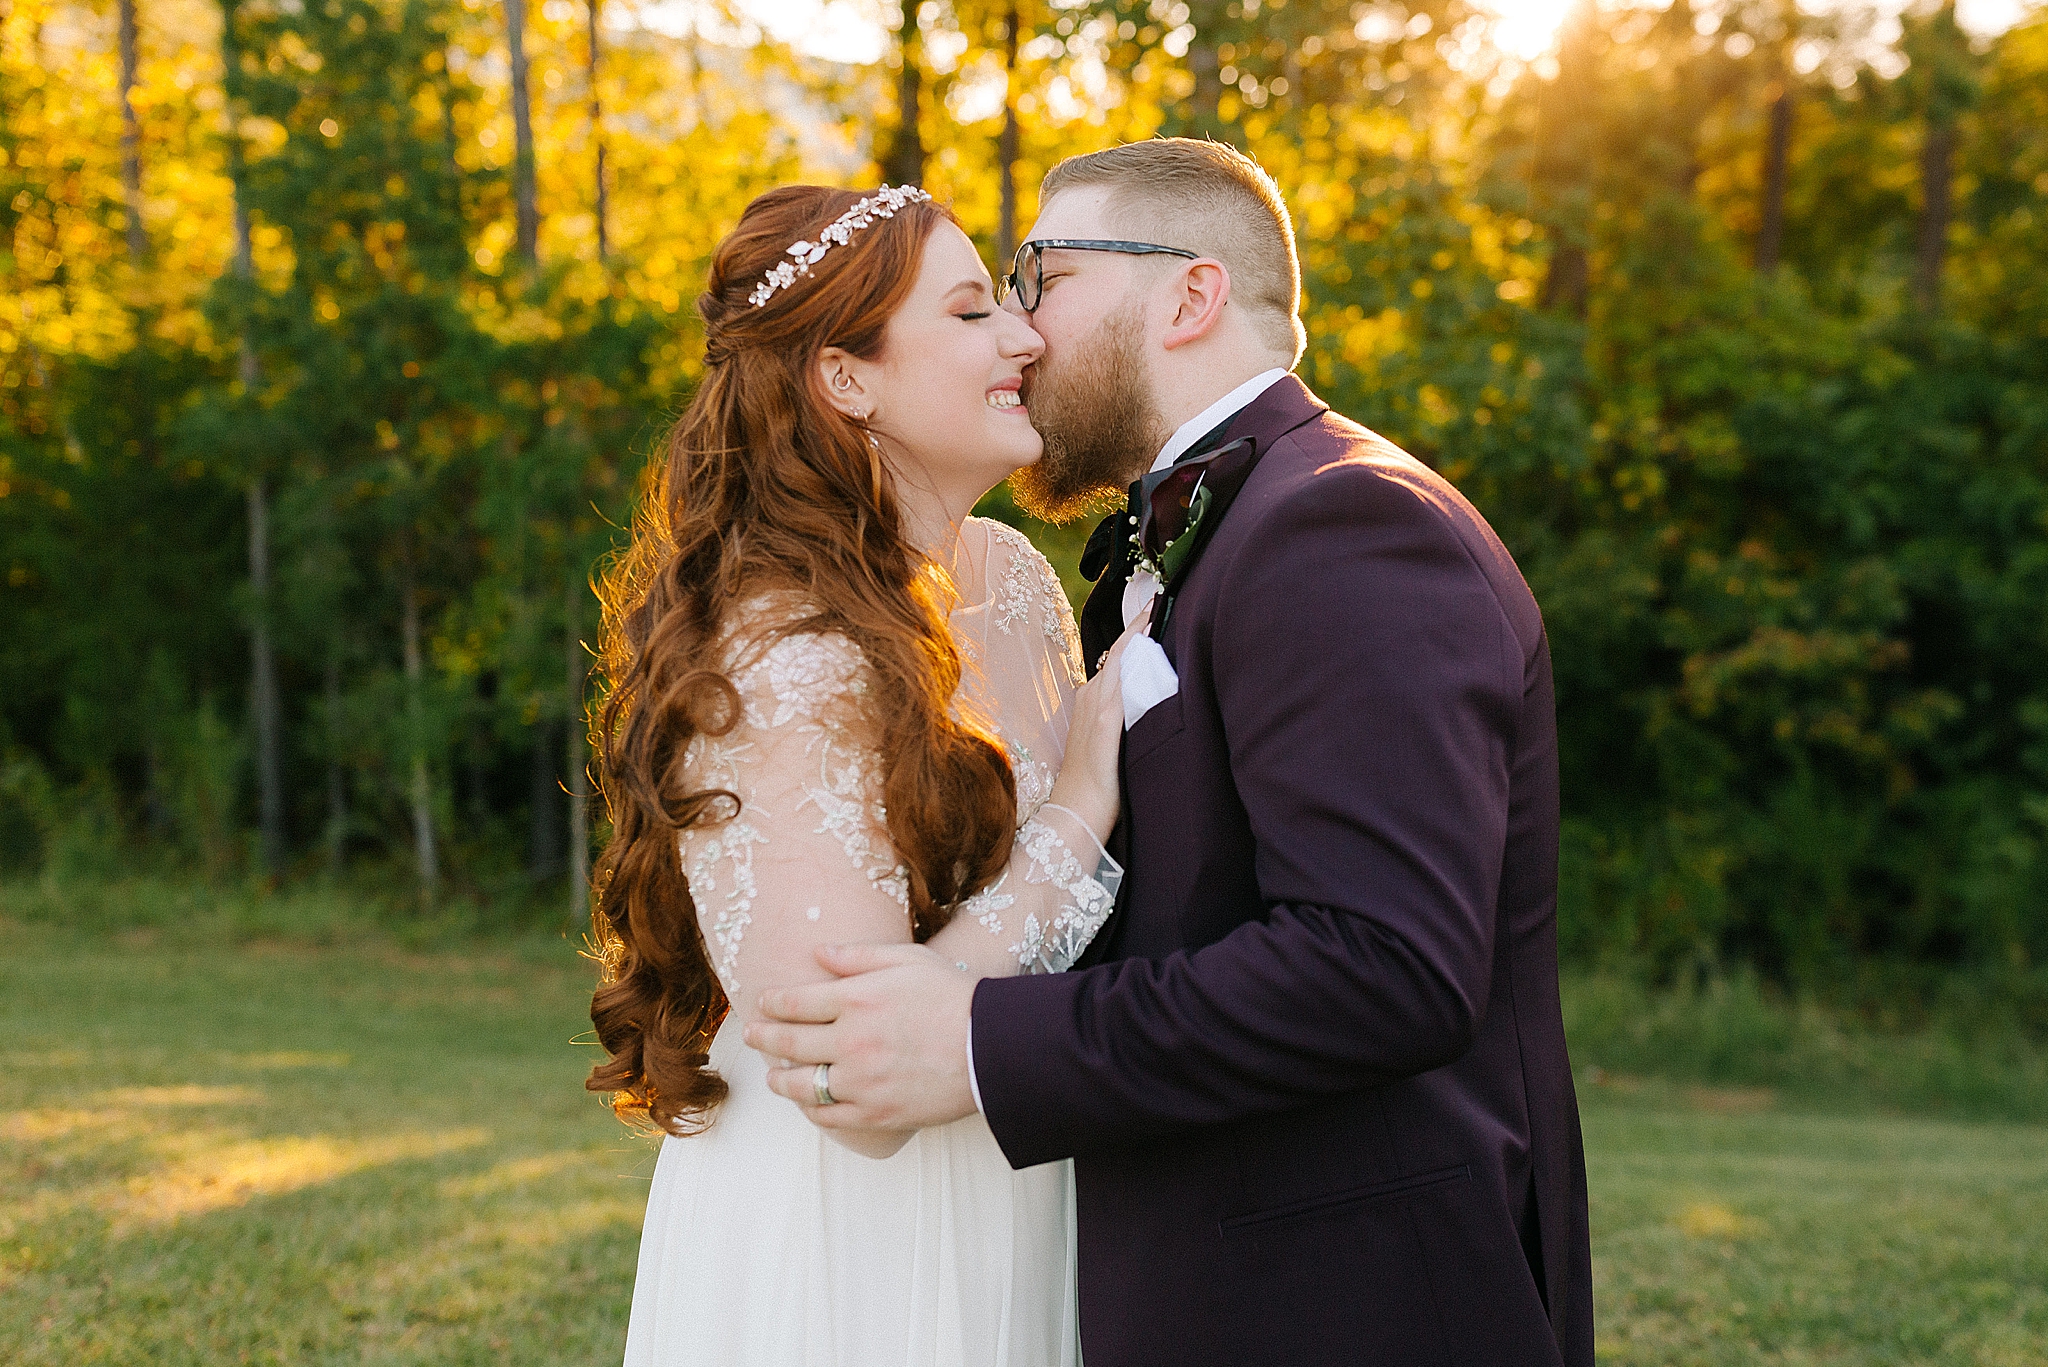 groom kisses bride on the cheek during sunset wedding photos